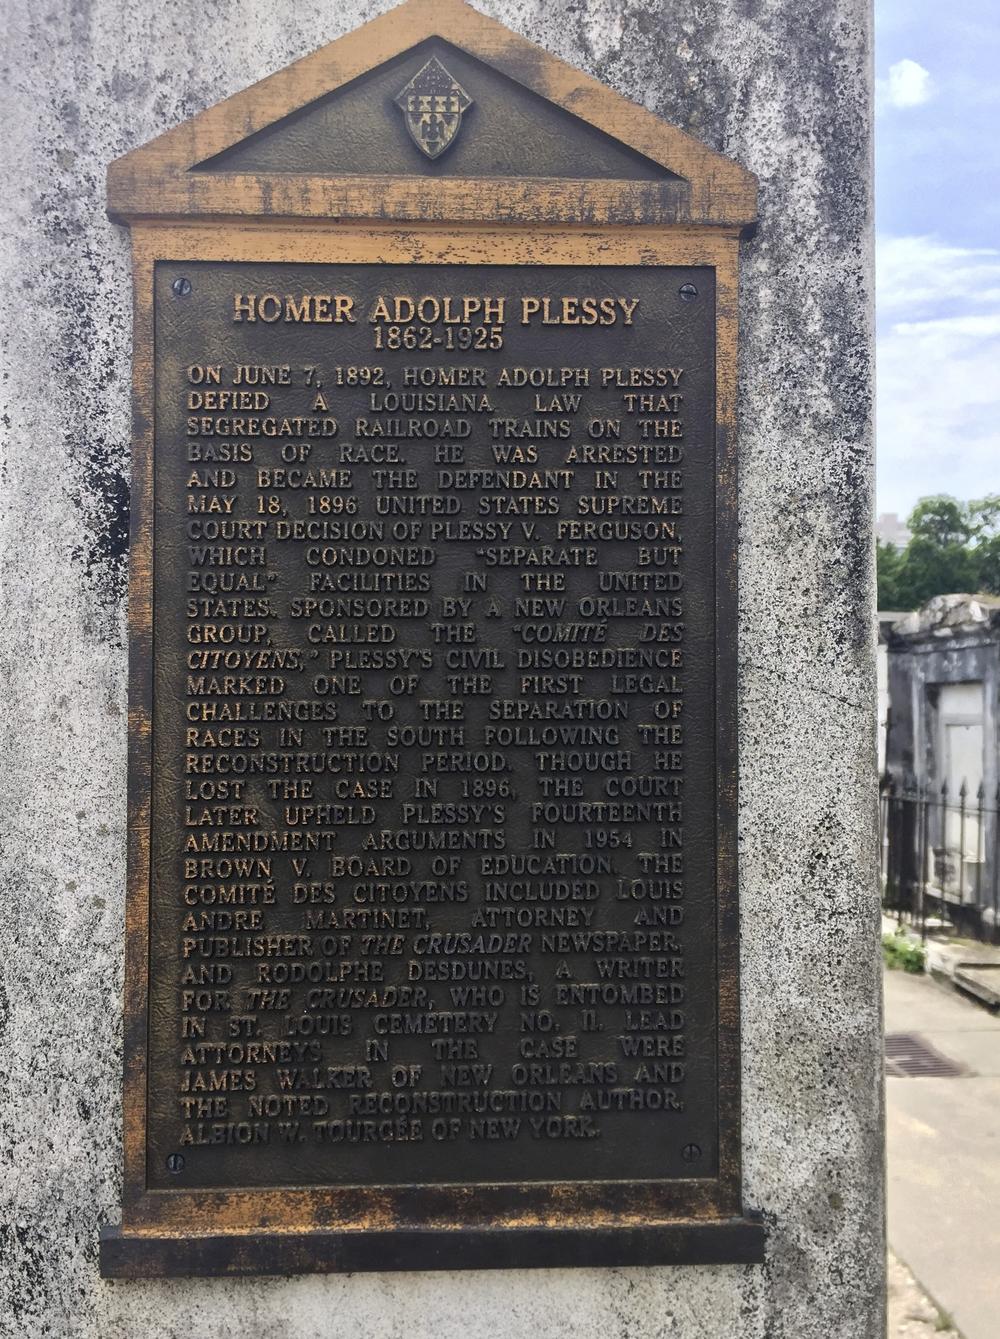 This June 3, 2018 photo shows a marker on the burial site for Homer Plessy at St. Louis No. 1 Cemetery in New Orleans.